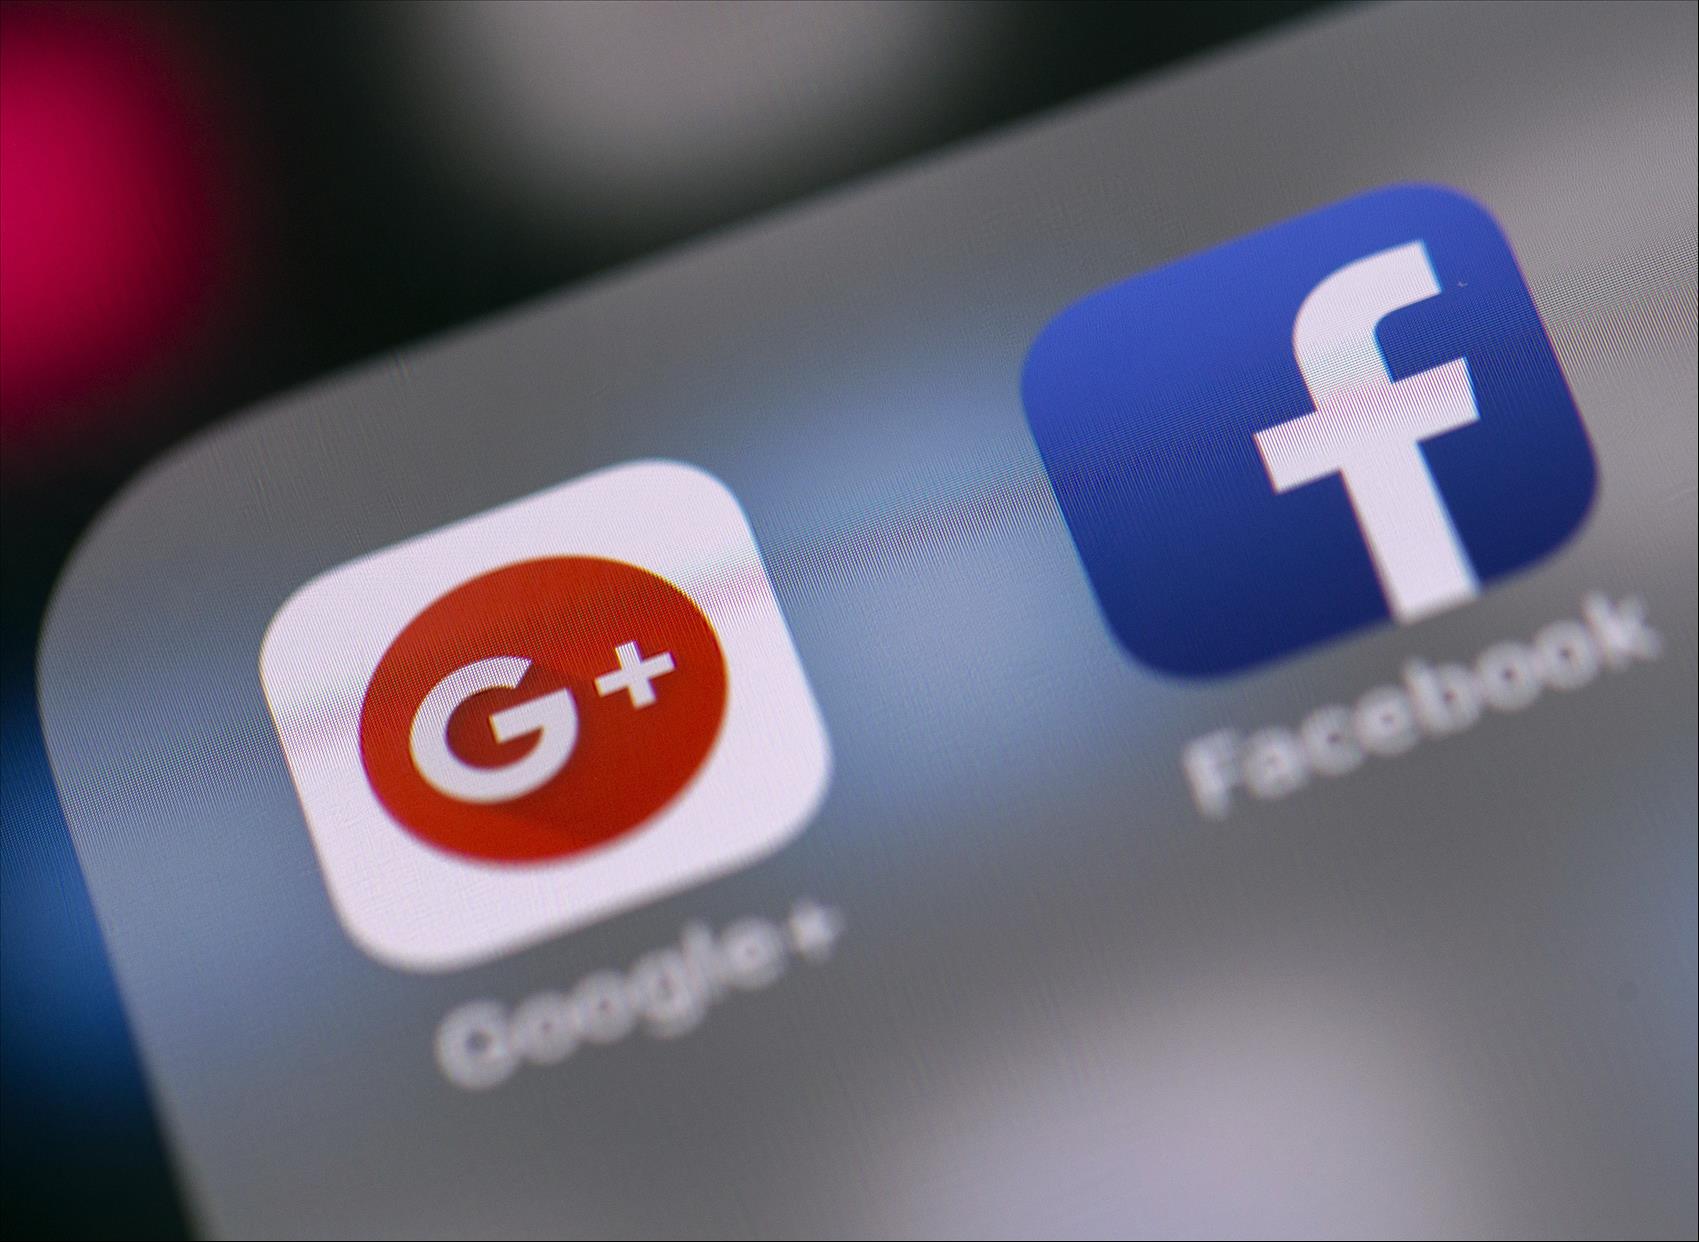 Breaking News: Making Google And Facebook Pay NZ Media For Content Could Deliver Less Than Bargained For